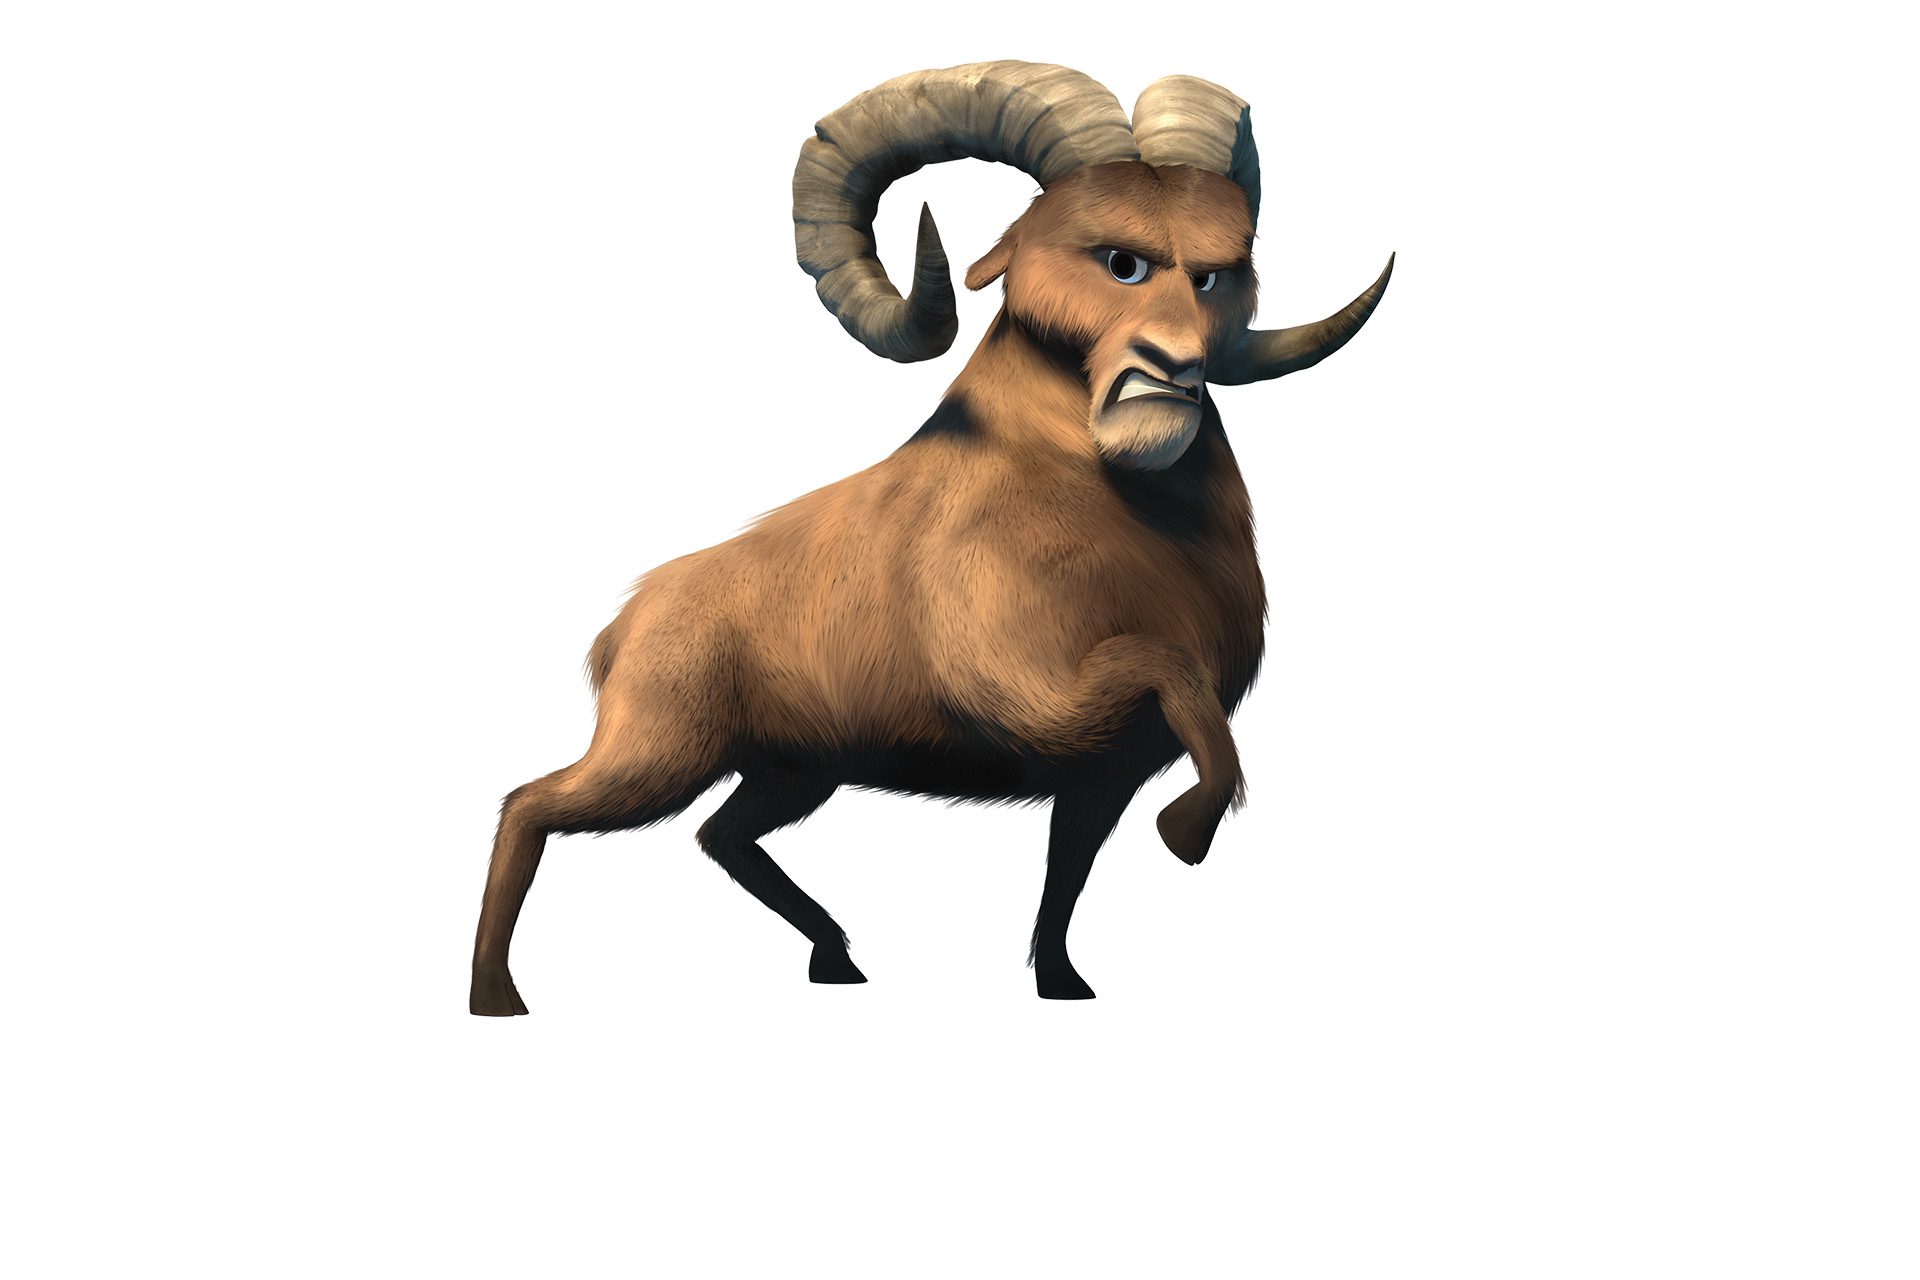 Animation of a big horn sheep with obvious strength and a mean expression.